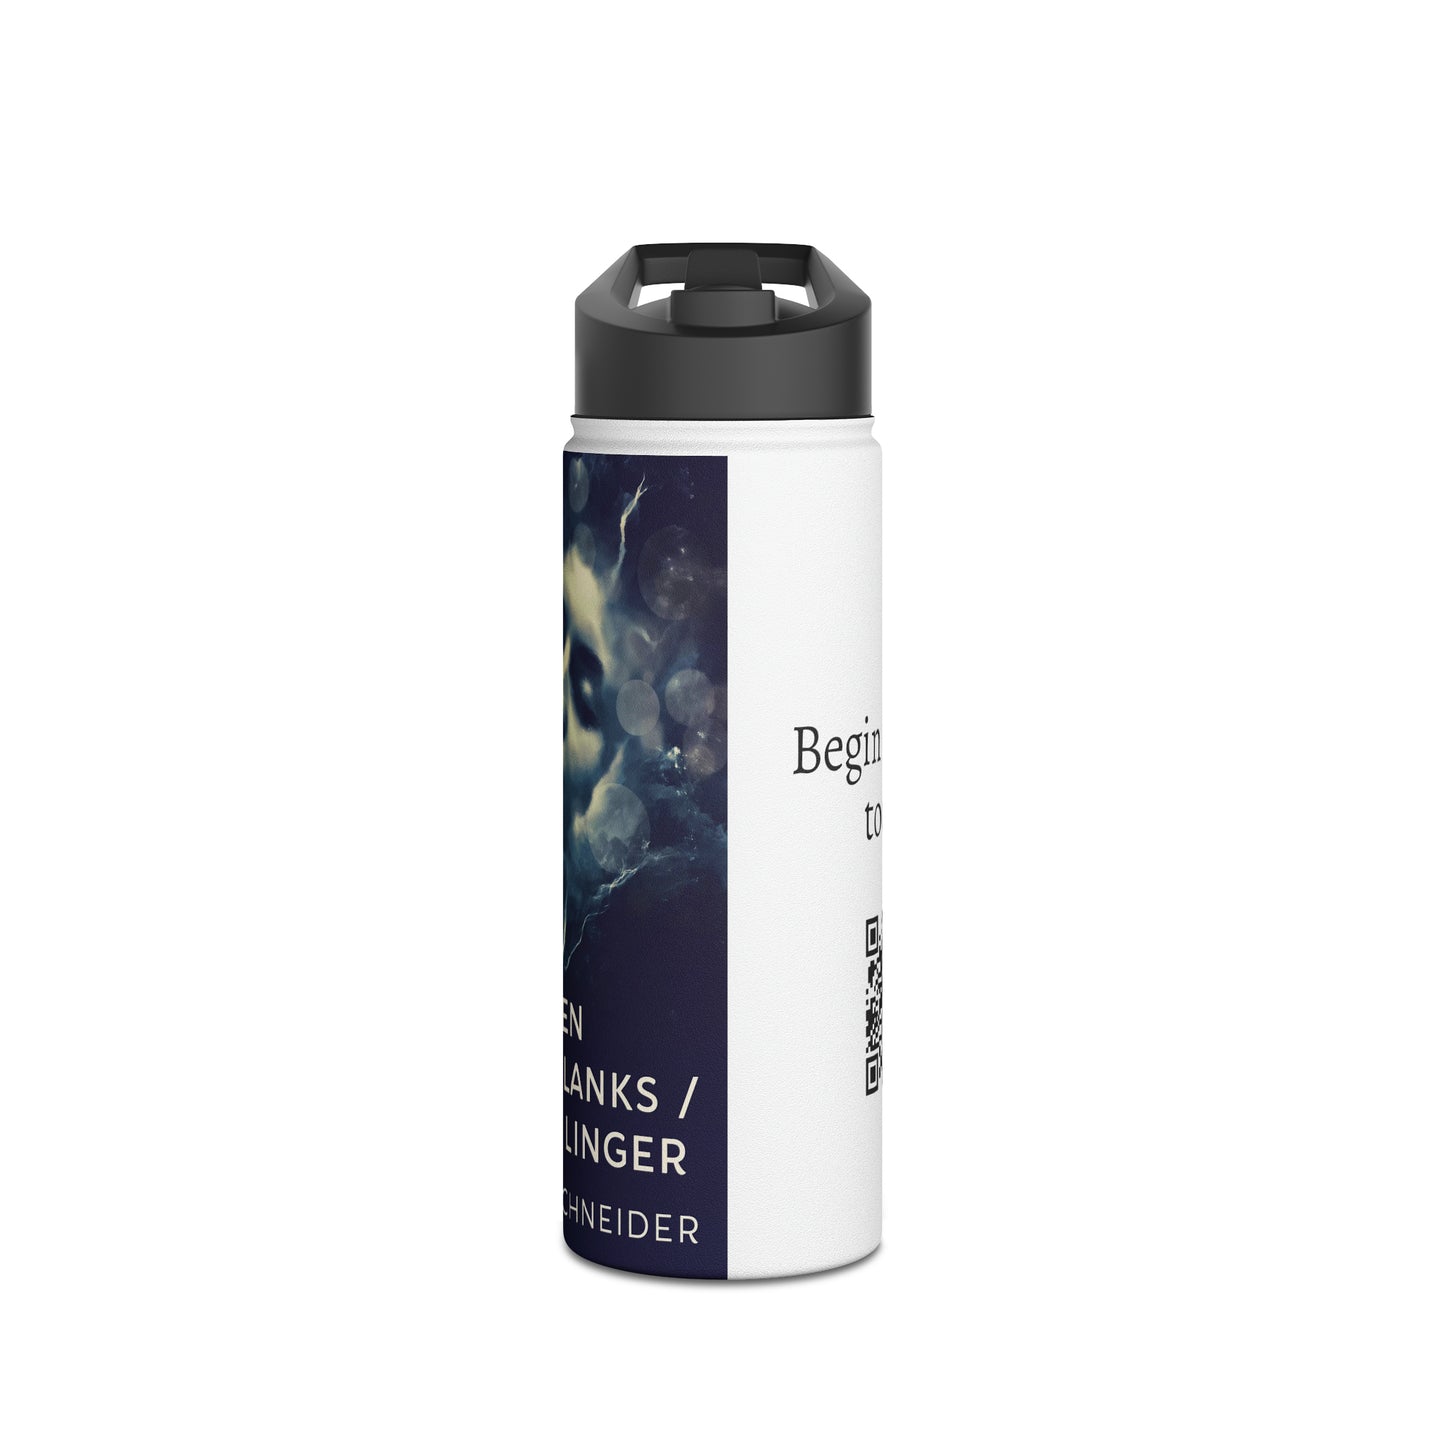 When Links / Blanks / Puzzles Linger - Stainless Steel Water Bottle